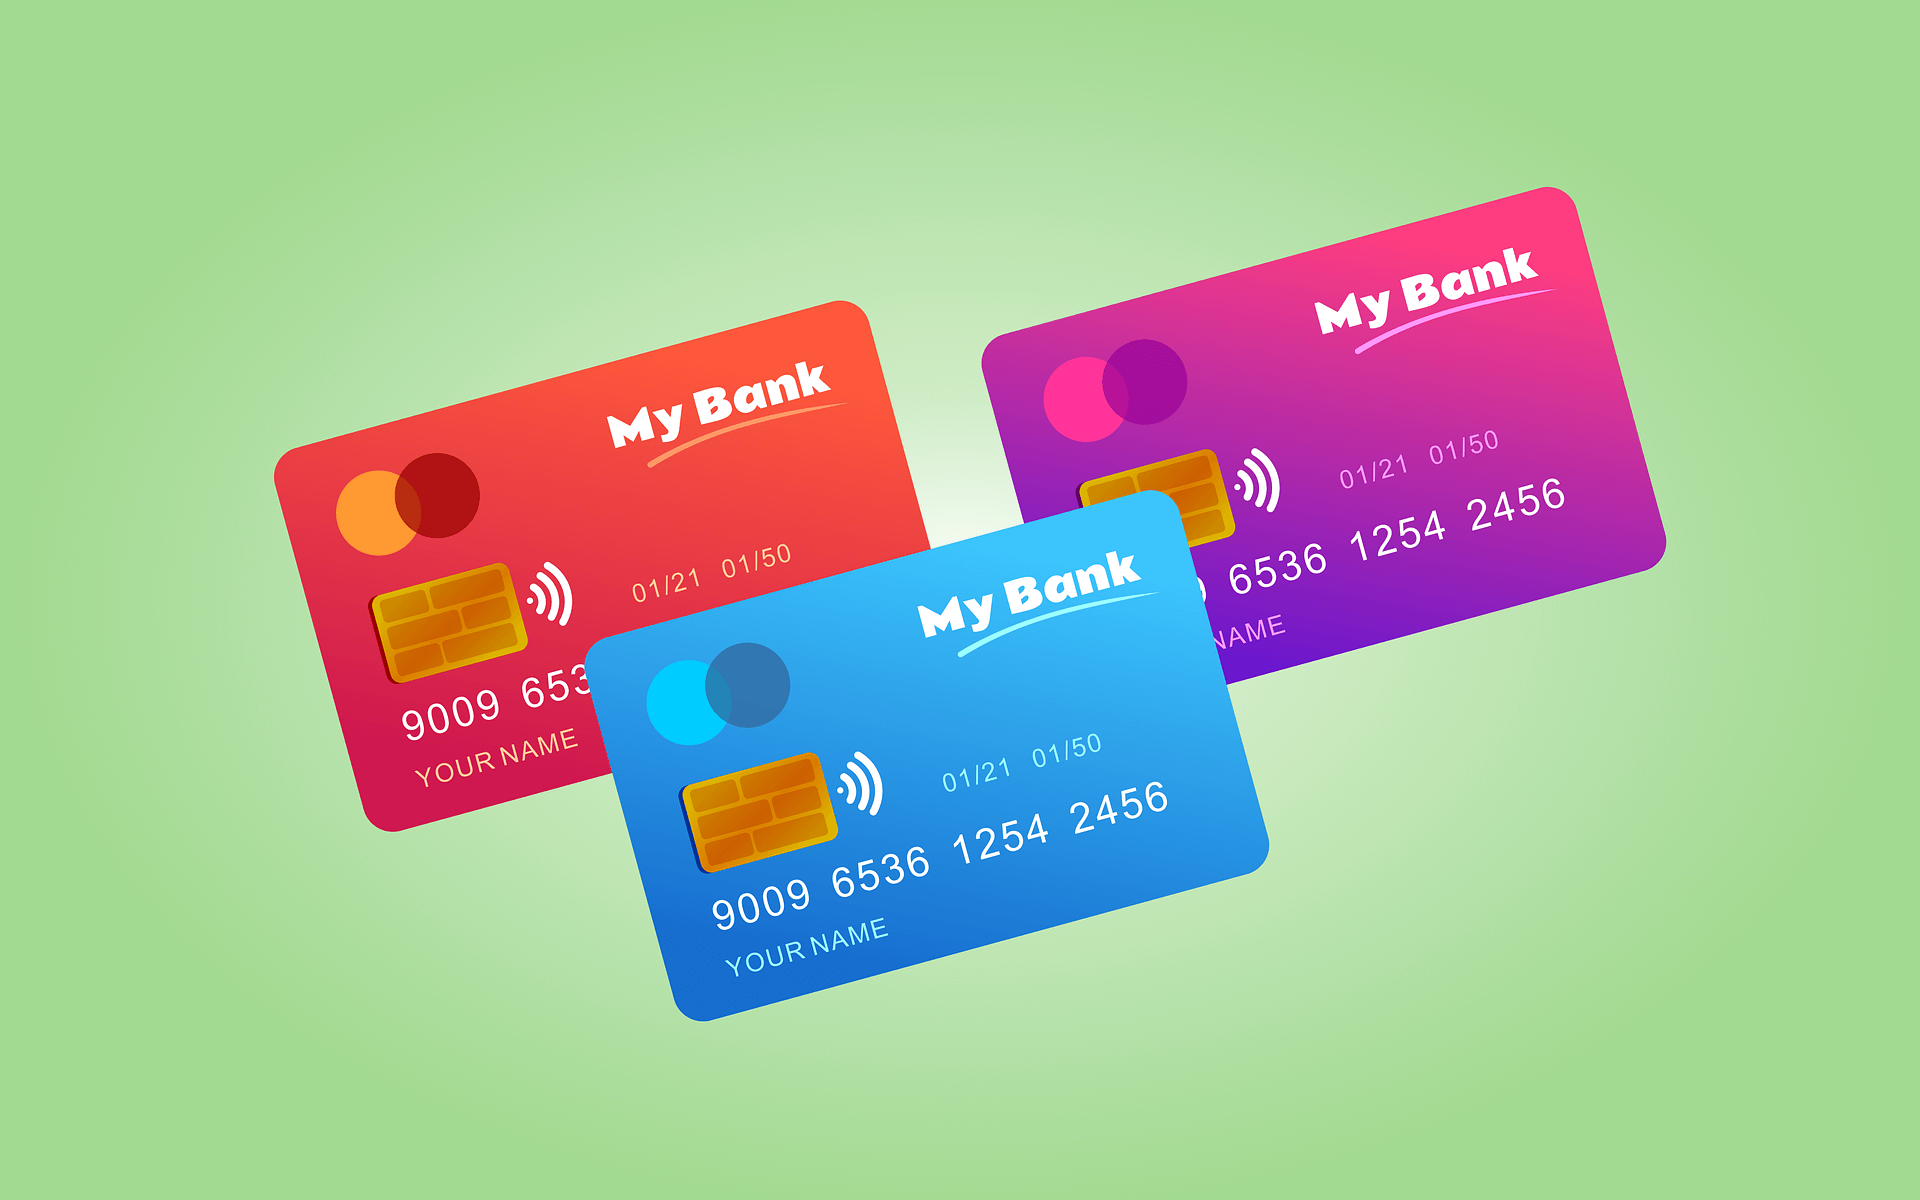 How To Manage a Credit Card Wisely